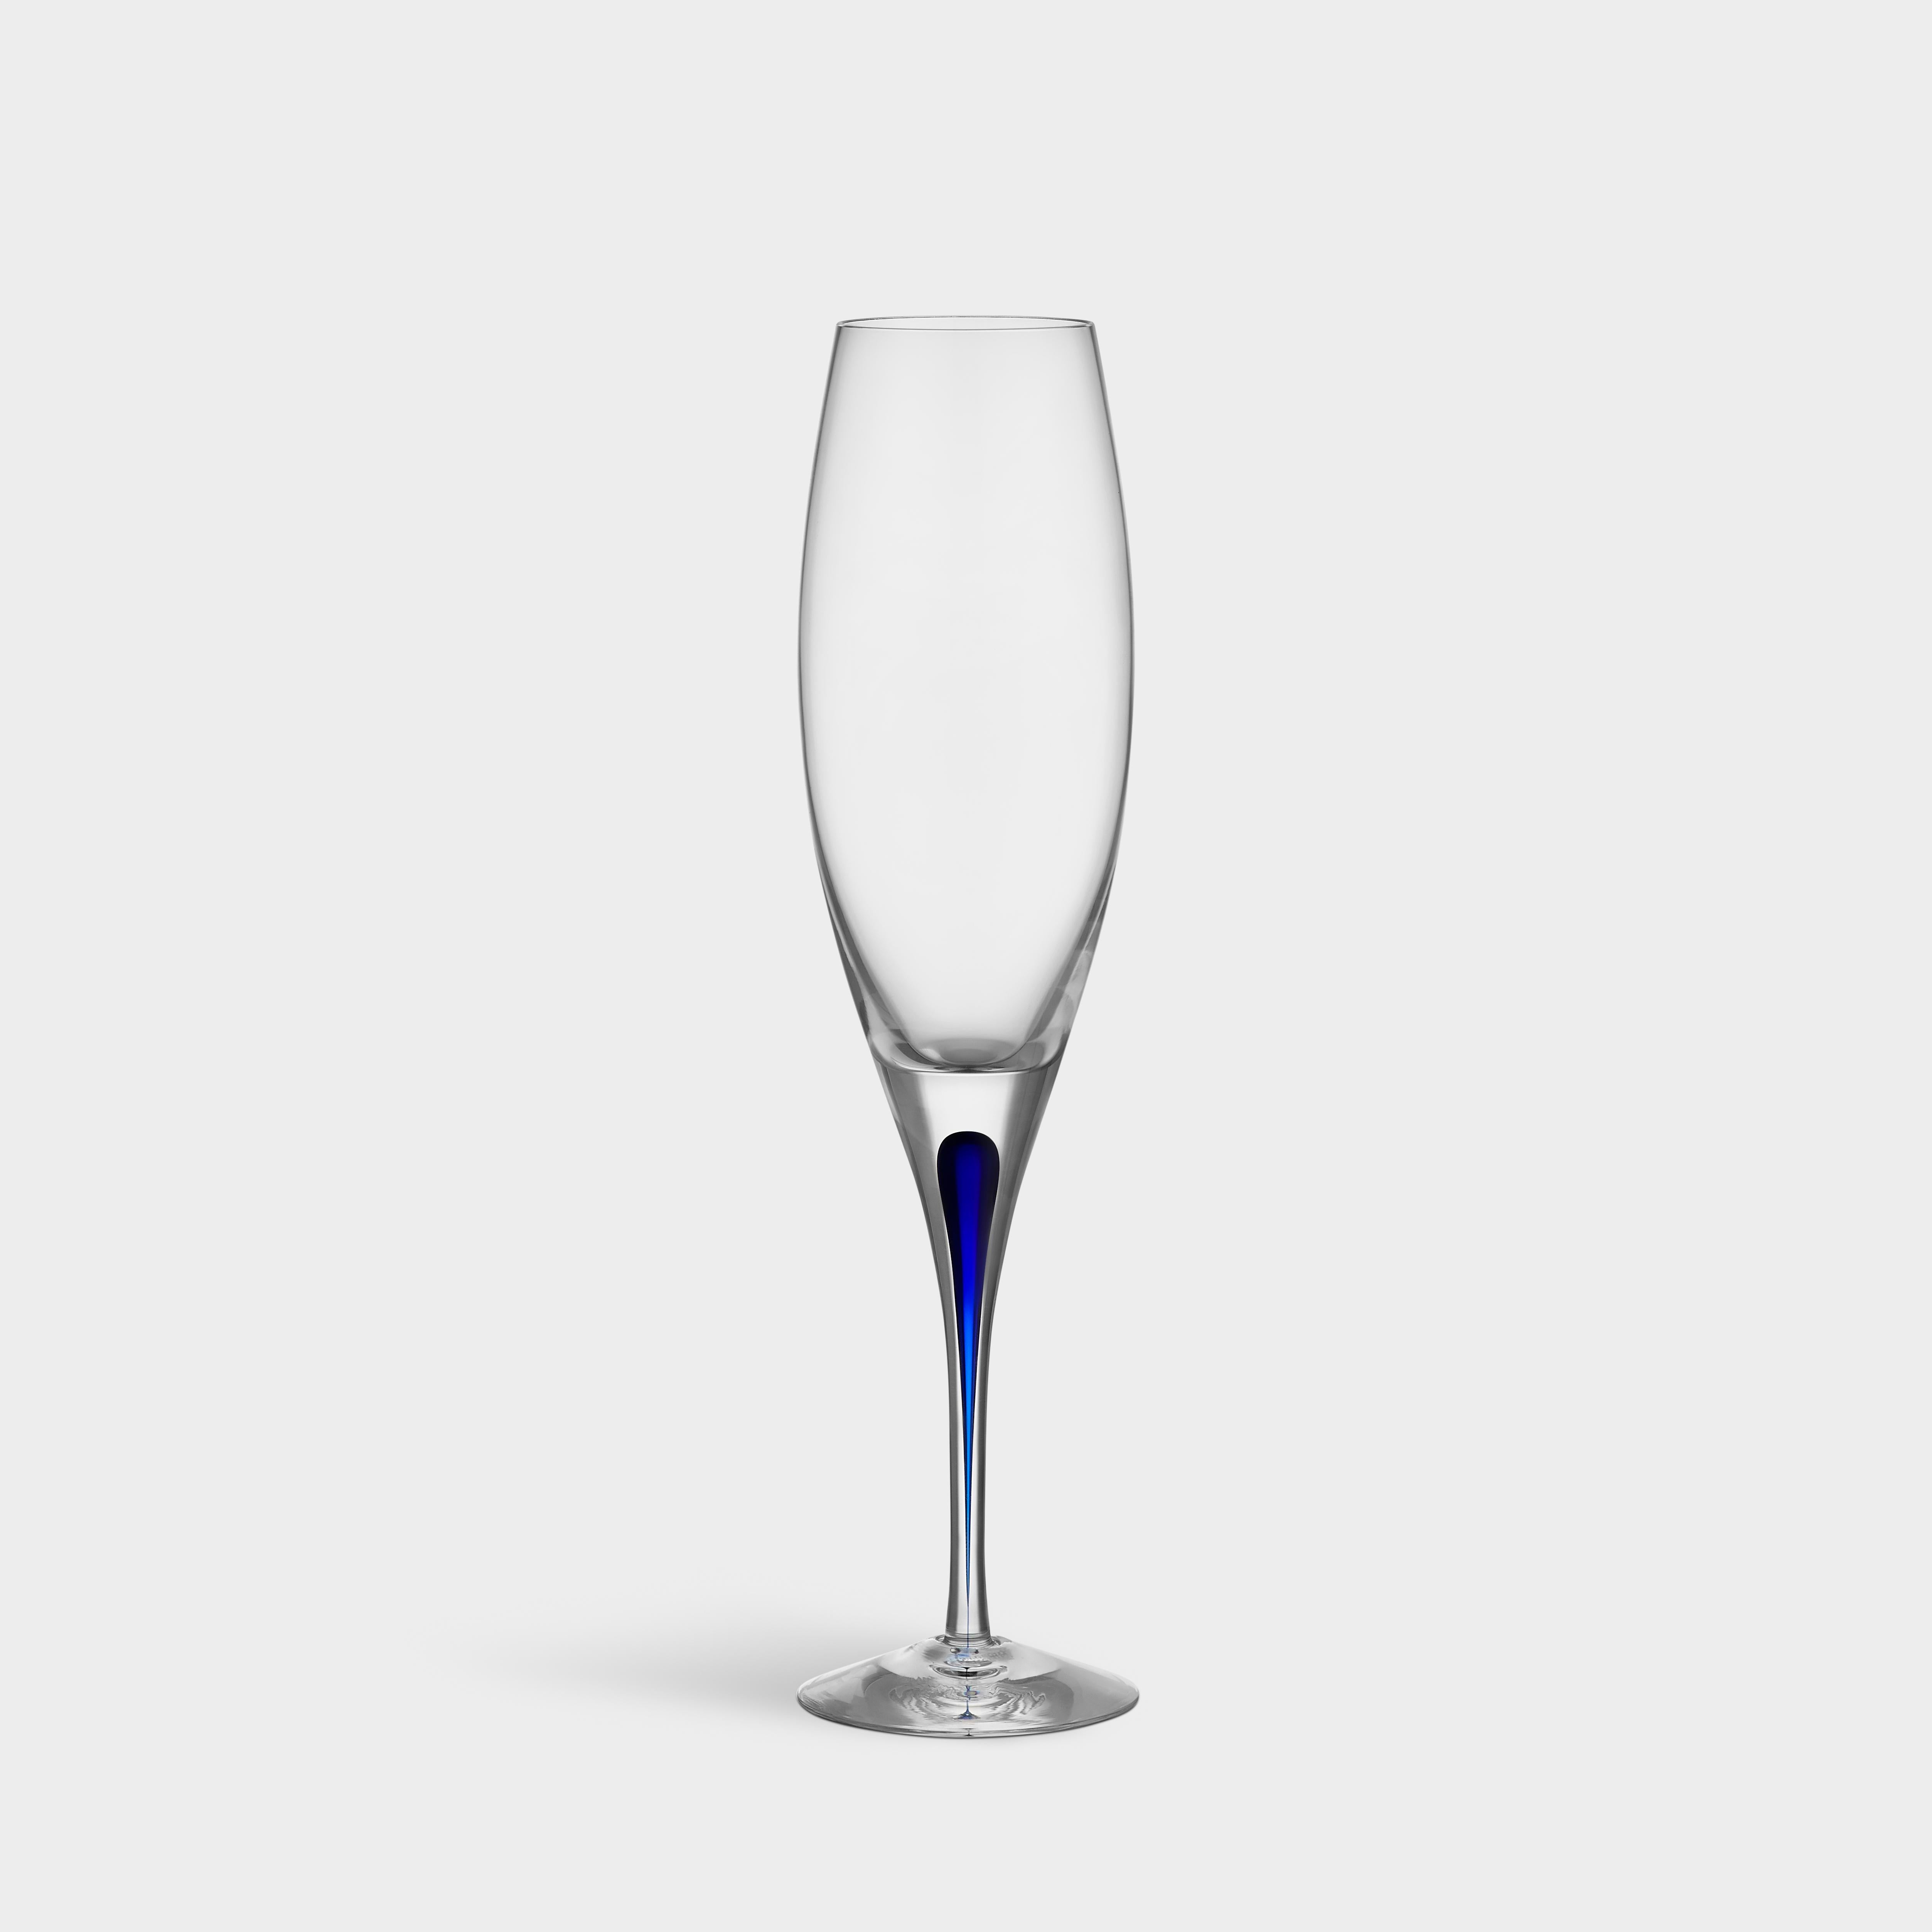 Intermezzo Flute from Orrefors was designed in 1984. The glass, which holds 7 oz, is suitable for sparkling beverages, such as champagne, with its tall, slim bowl preserving the bubbles in the drink. Intermezzo Flute is mouth-blown in Sweden by